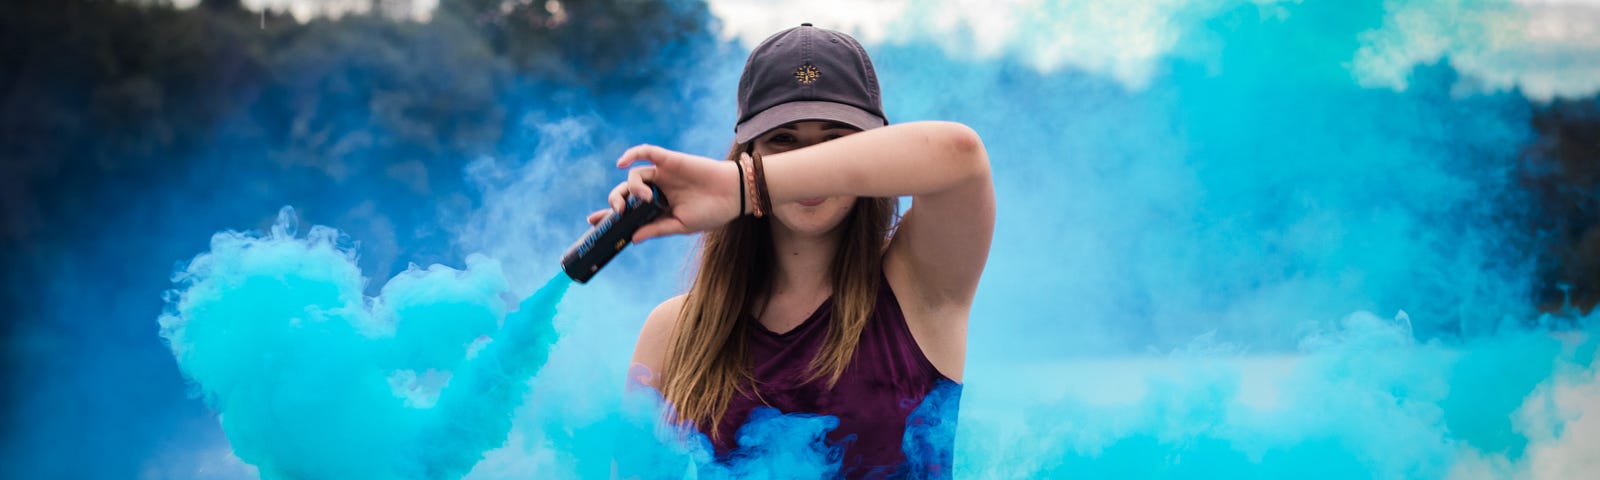 Woman in a baseball cap and a tank top waves a blue smoke flare.